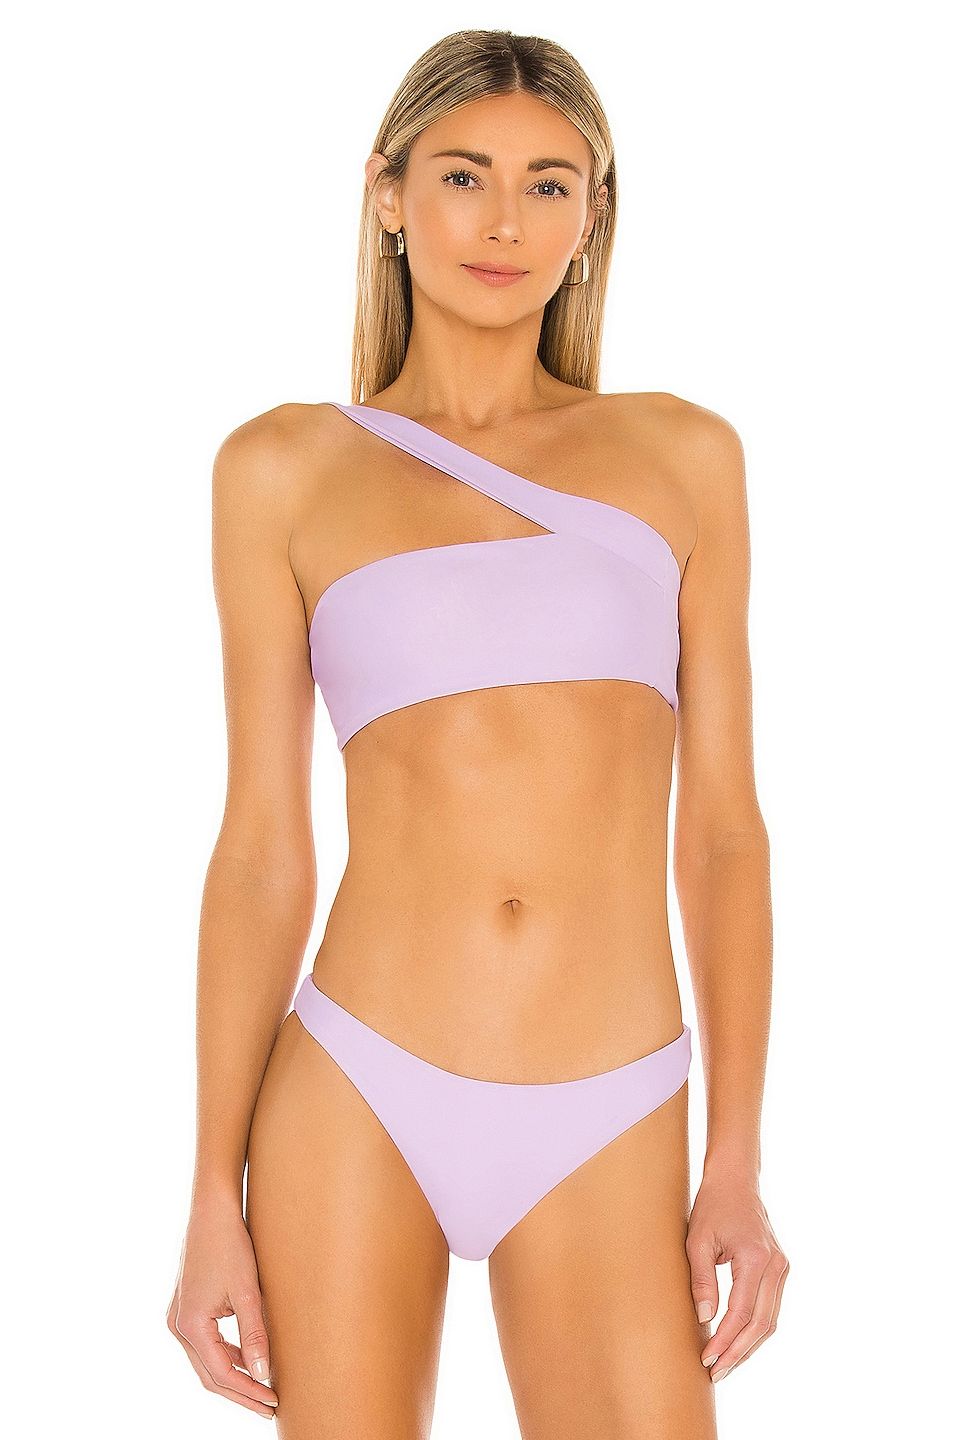 10 Swimsuits for Small Bust Body Types ideas  swimsuits, swimsuits for small  bust, bikinis